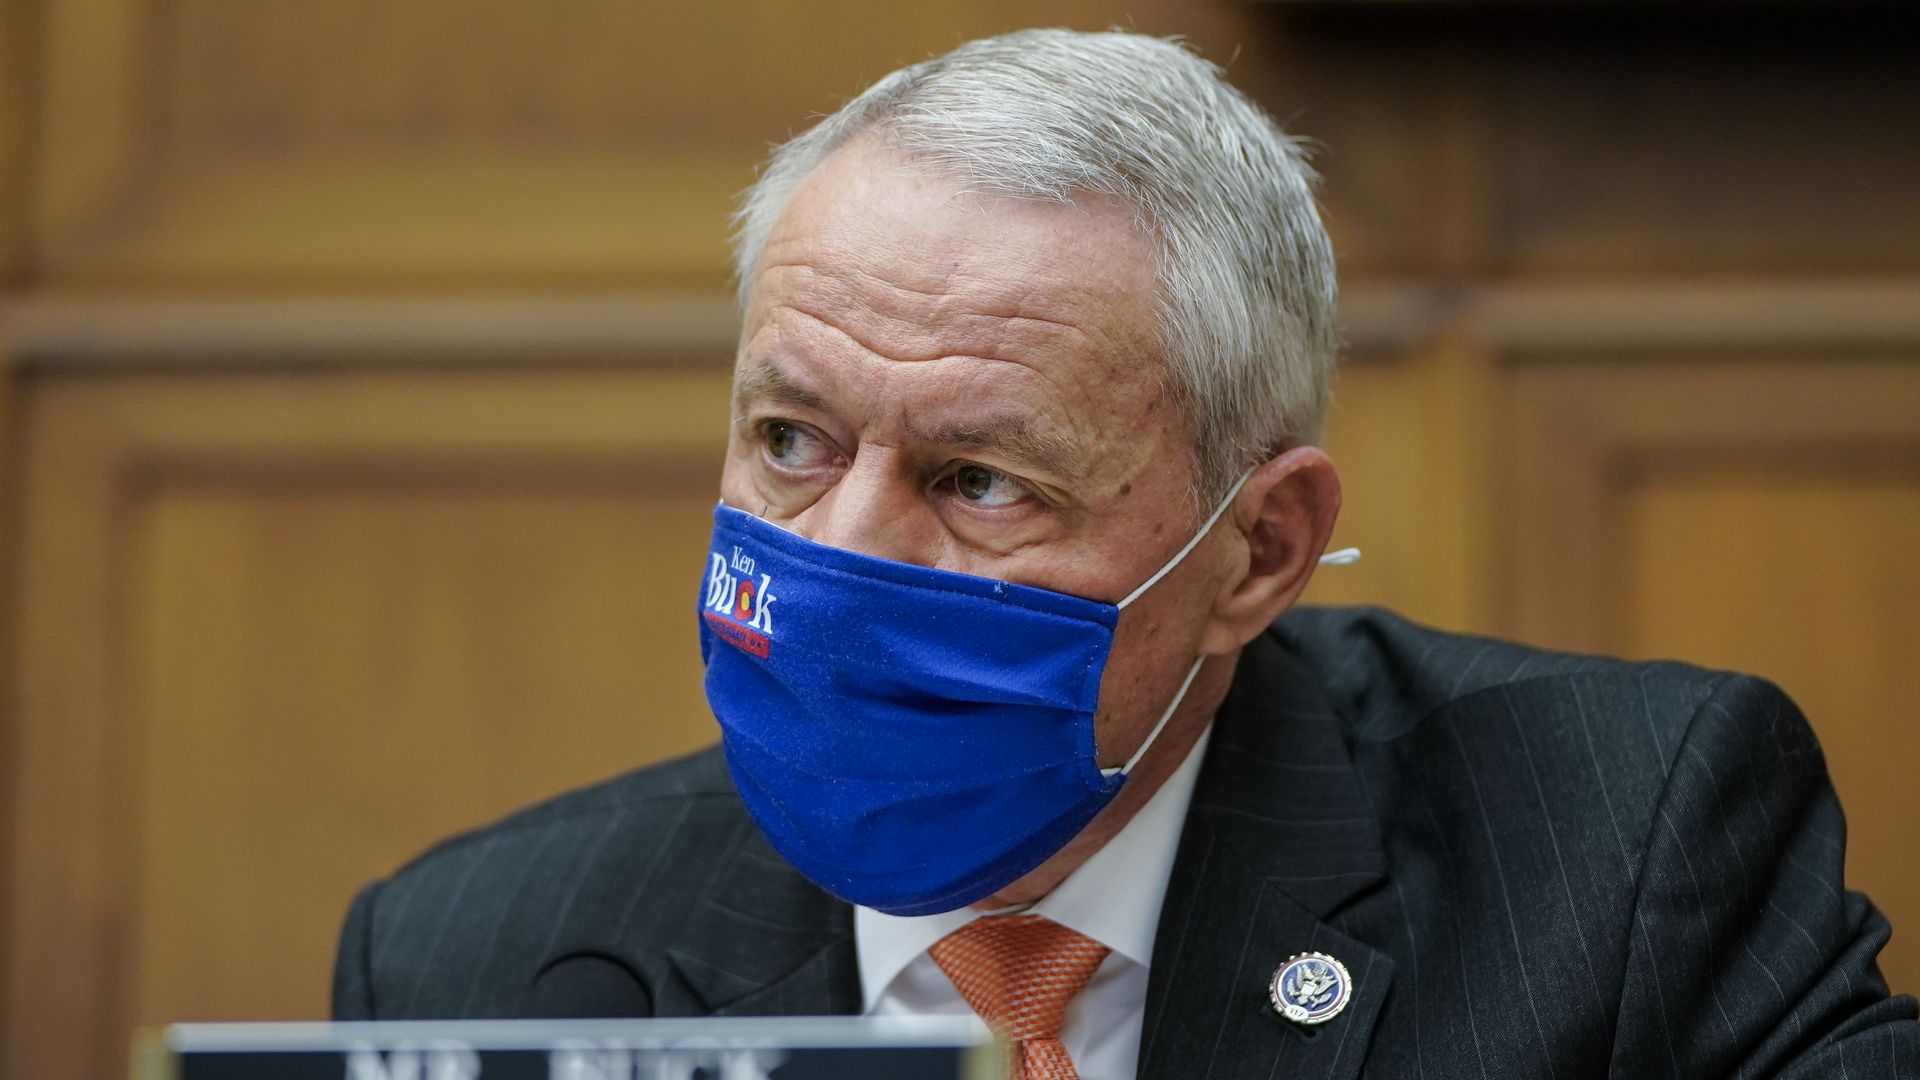 Photo of Rep. Ken Buck (R-Colo.) wearing a blue mask.